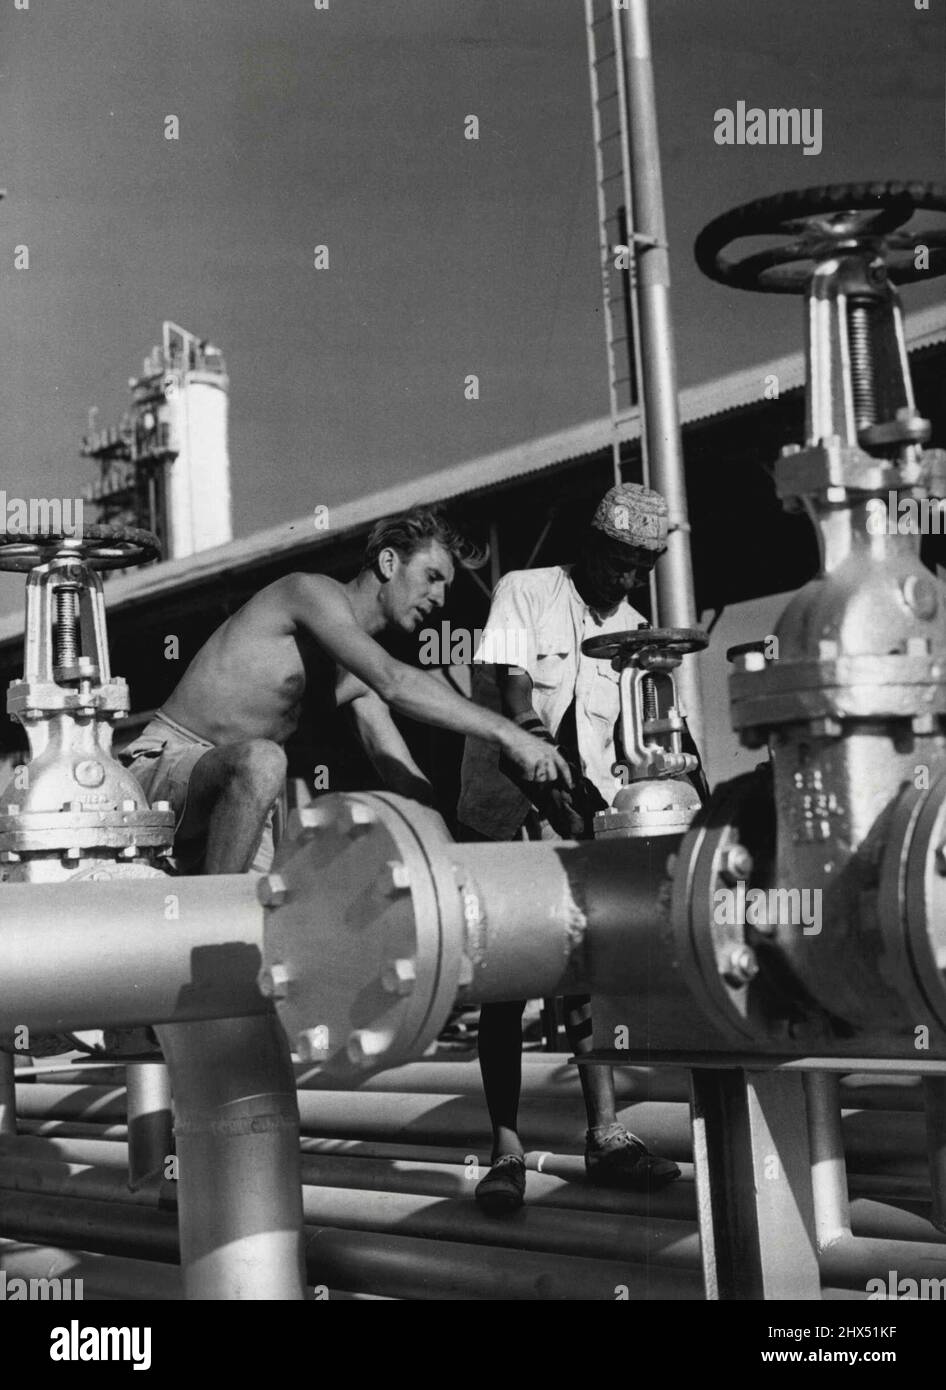 Oil Men At Work. John W. Fairbairn from Durham England, one of the English technicians employed on the Aden Oil Refinery project, see instructing an Arab worker in pipe fitting. From a barren waste christened 'Dead Man's Gulch' by the first oil men on the spot, a vast community has sprung up around the gigantic Aden Oil Refinery, which is being built to help to replace Abadan. This £45,000,000 project, which will swing into action in August, is four months ahead of target - a remarkable feat. July 1, 1954. (Photo by Fox Photos). Stock Photo